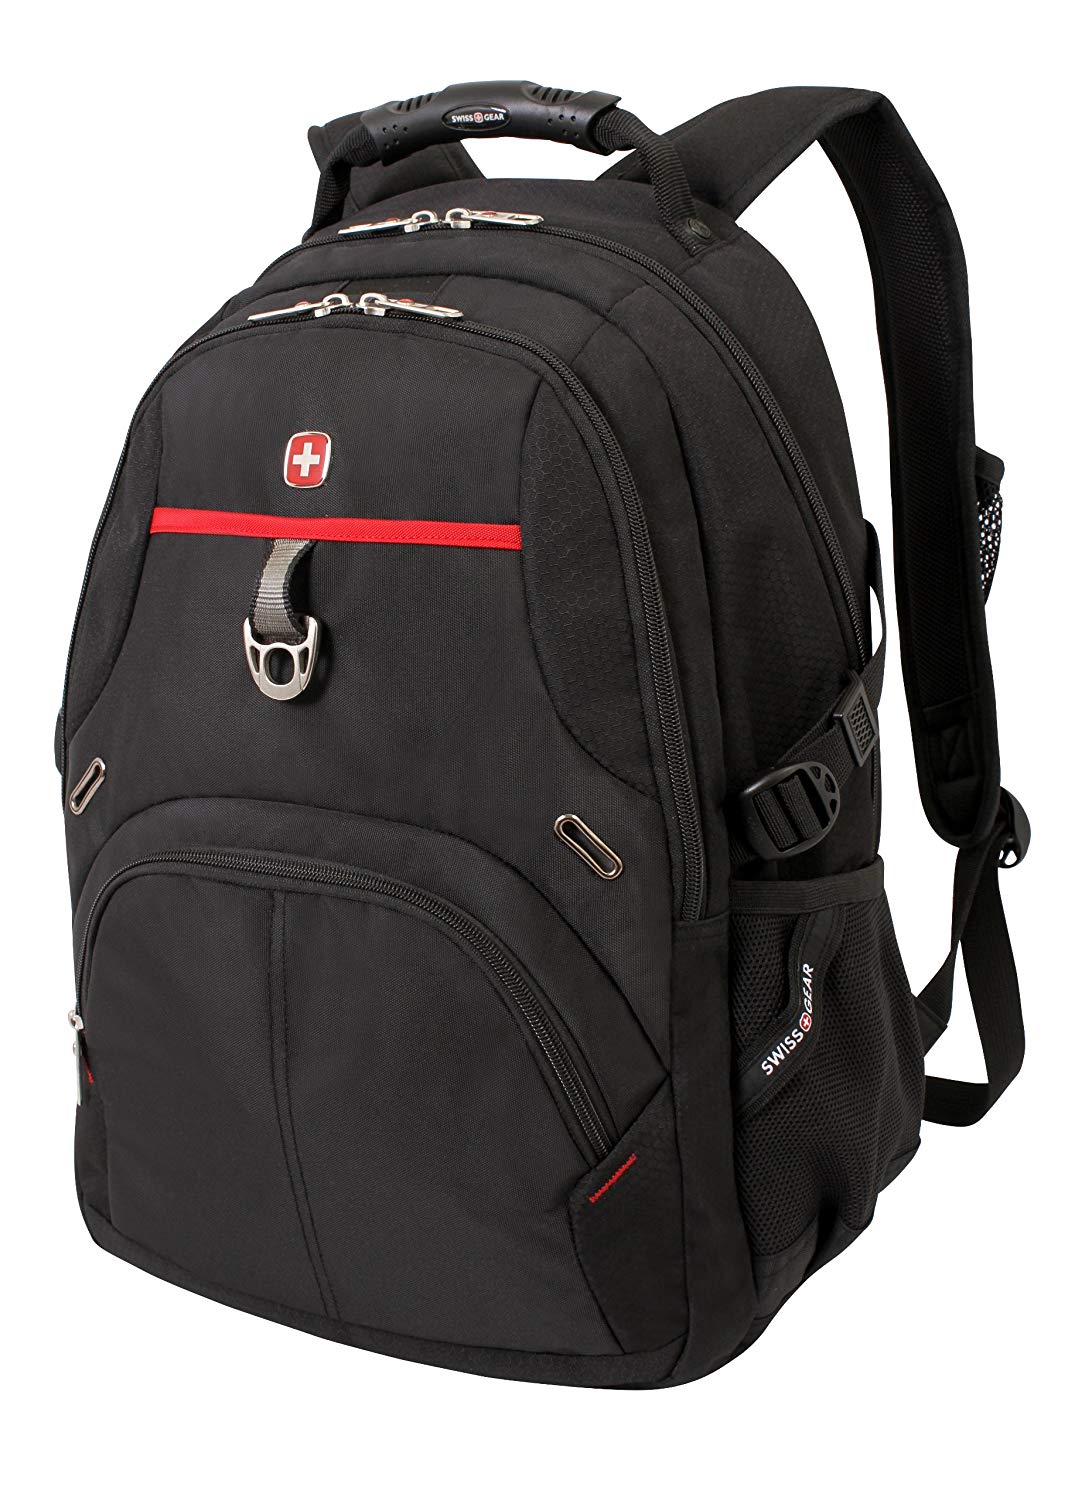 Luggage Red Cross Logo - Amazon.com: Swiss Gear SA3183 Black with Red Laptop Backpack - Fits ...